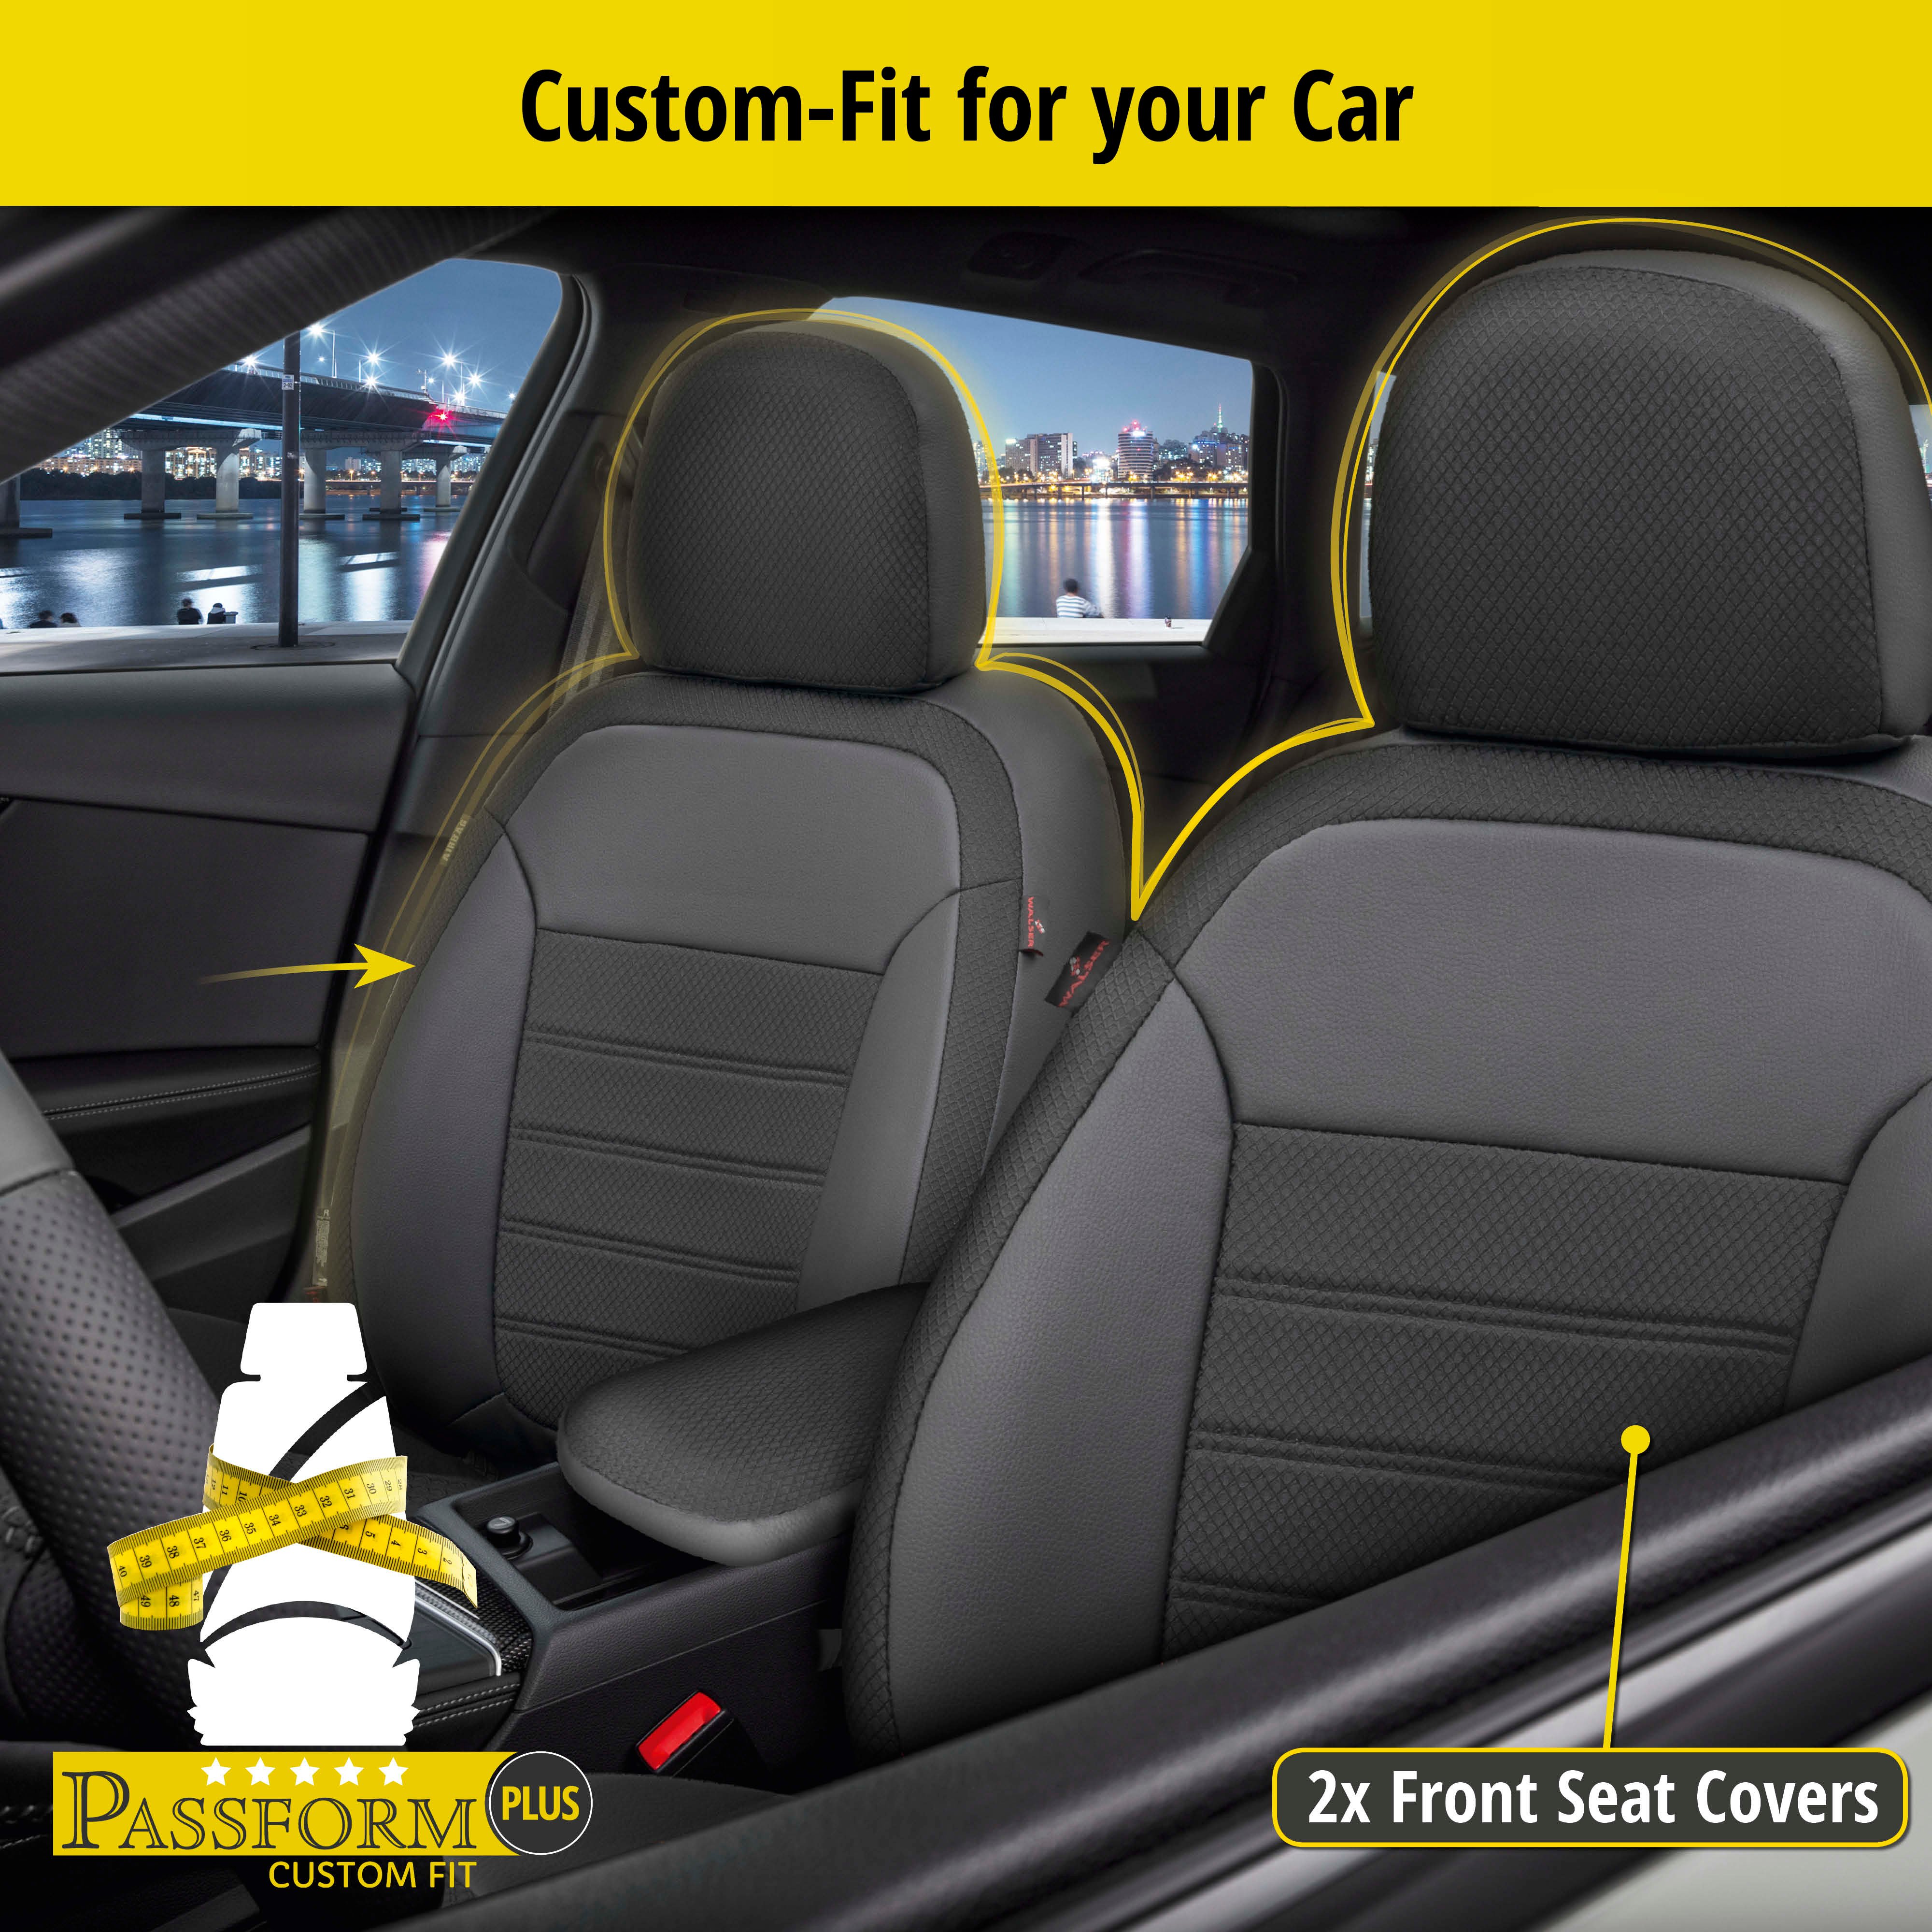 Seat Cover Aversa for Fiat 500L 2013-Today, 2 seat covers for normal seats